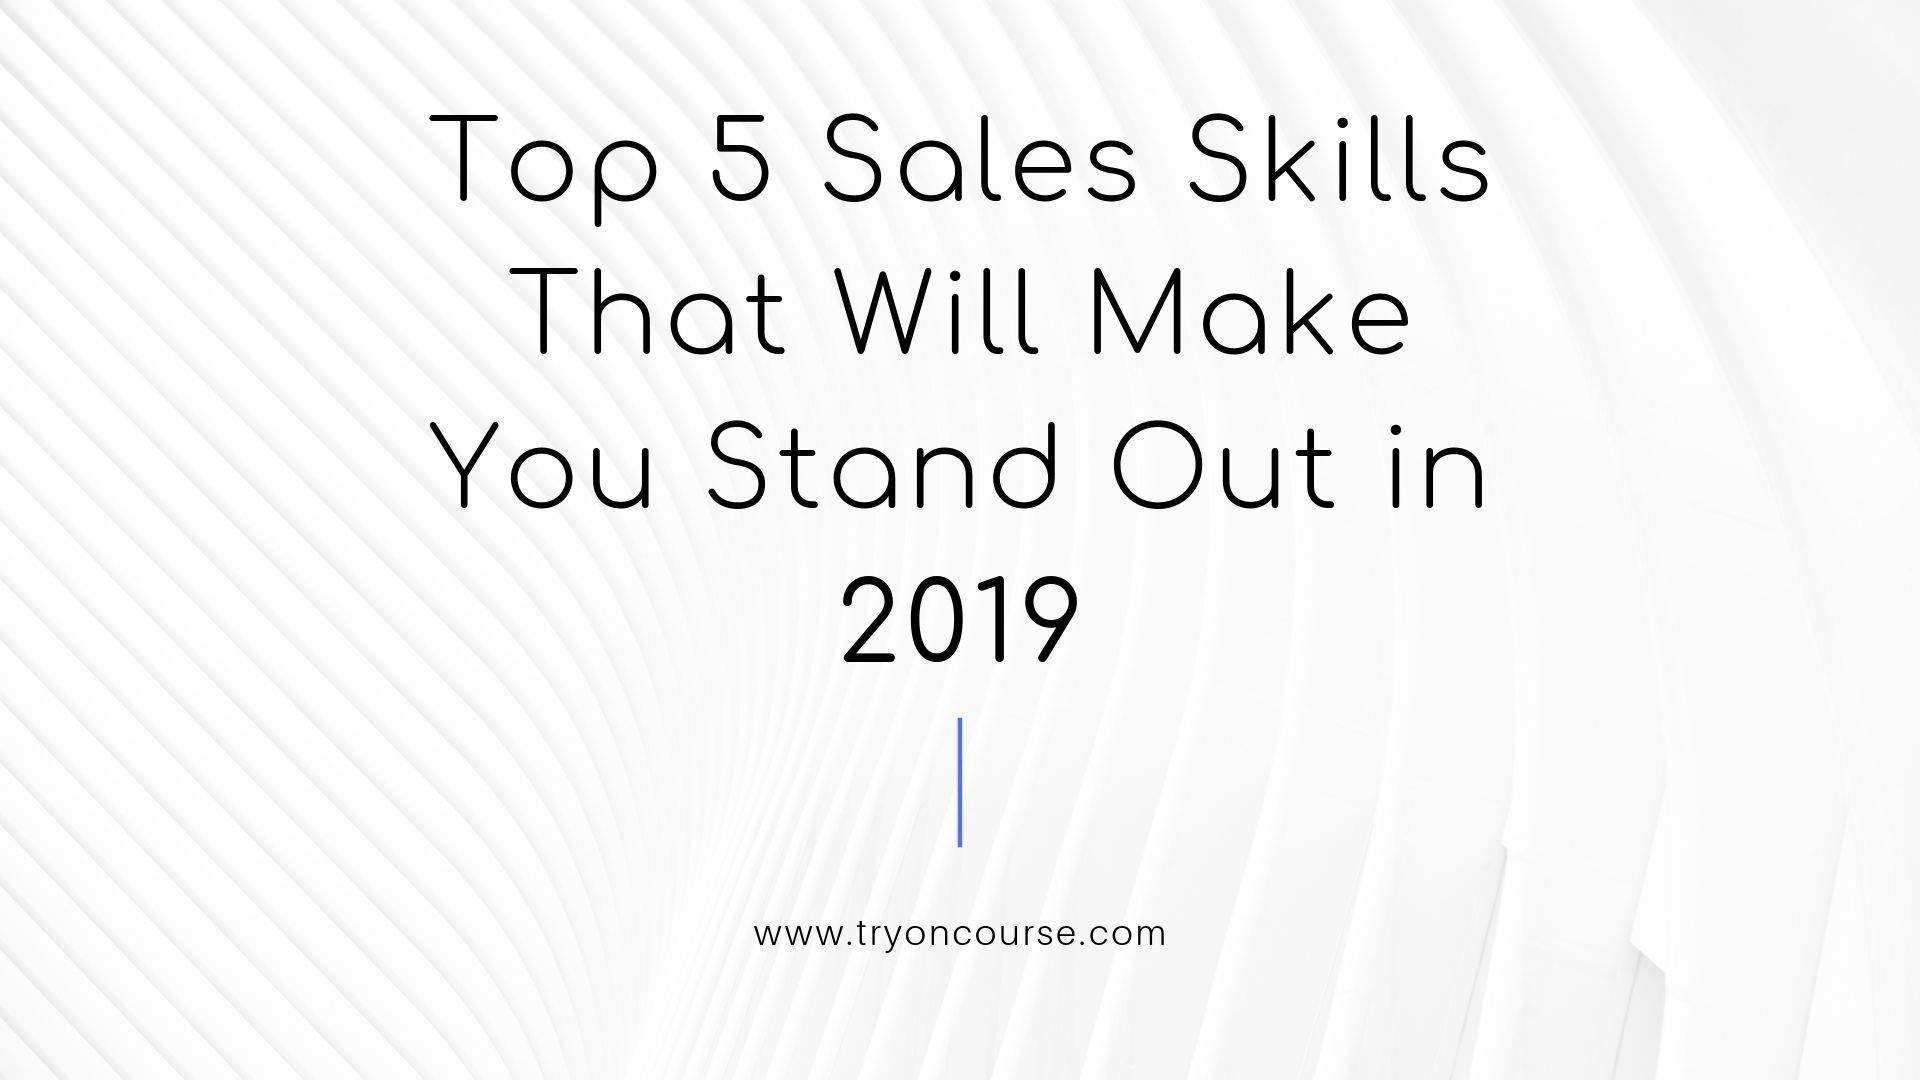 Top 5 Sales Skills That Will Make You Stand Out in 2019